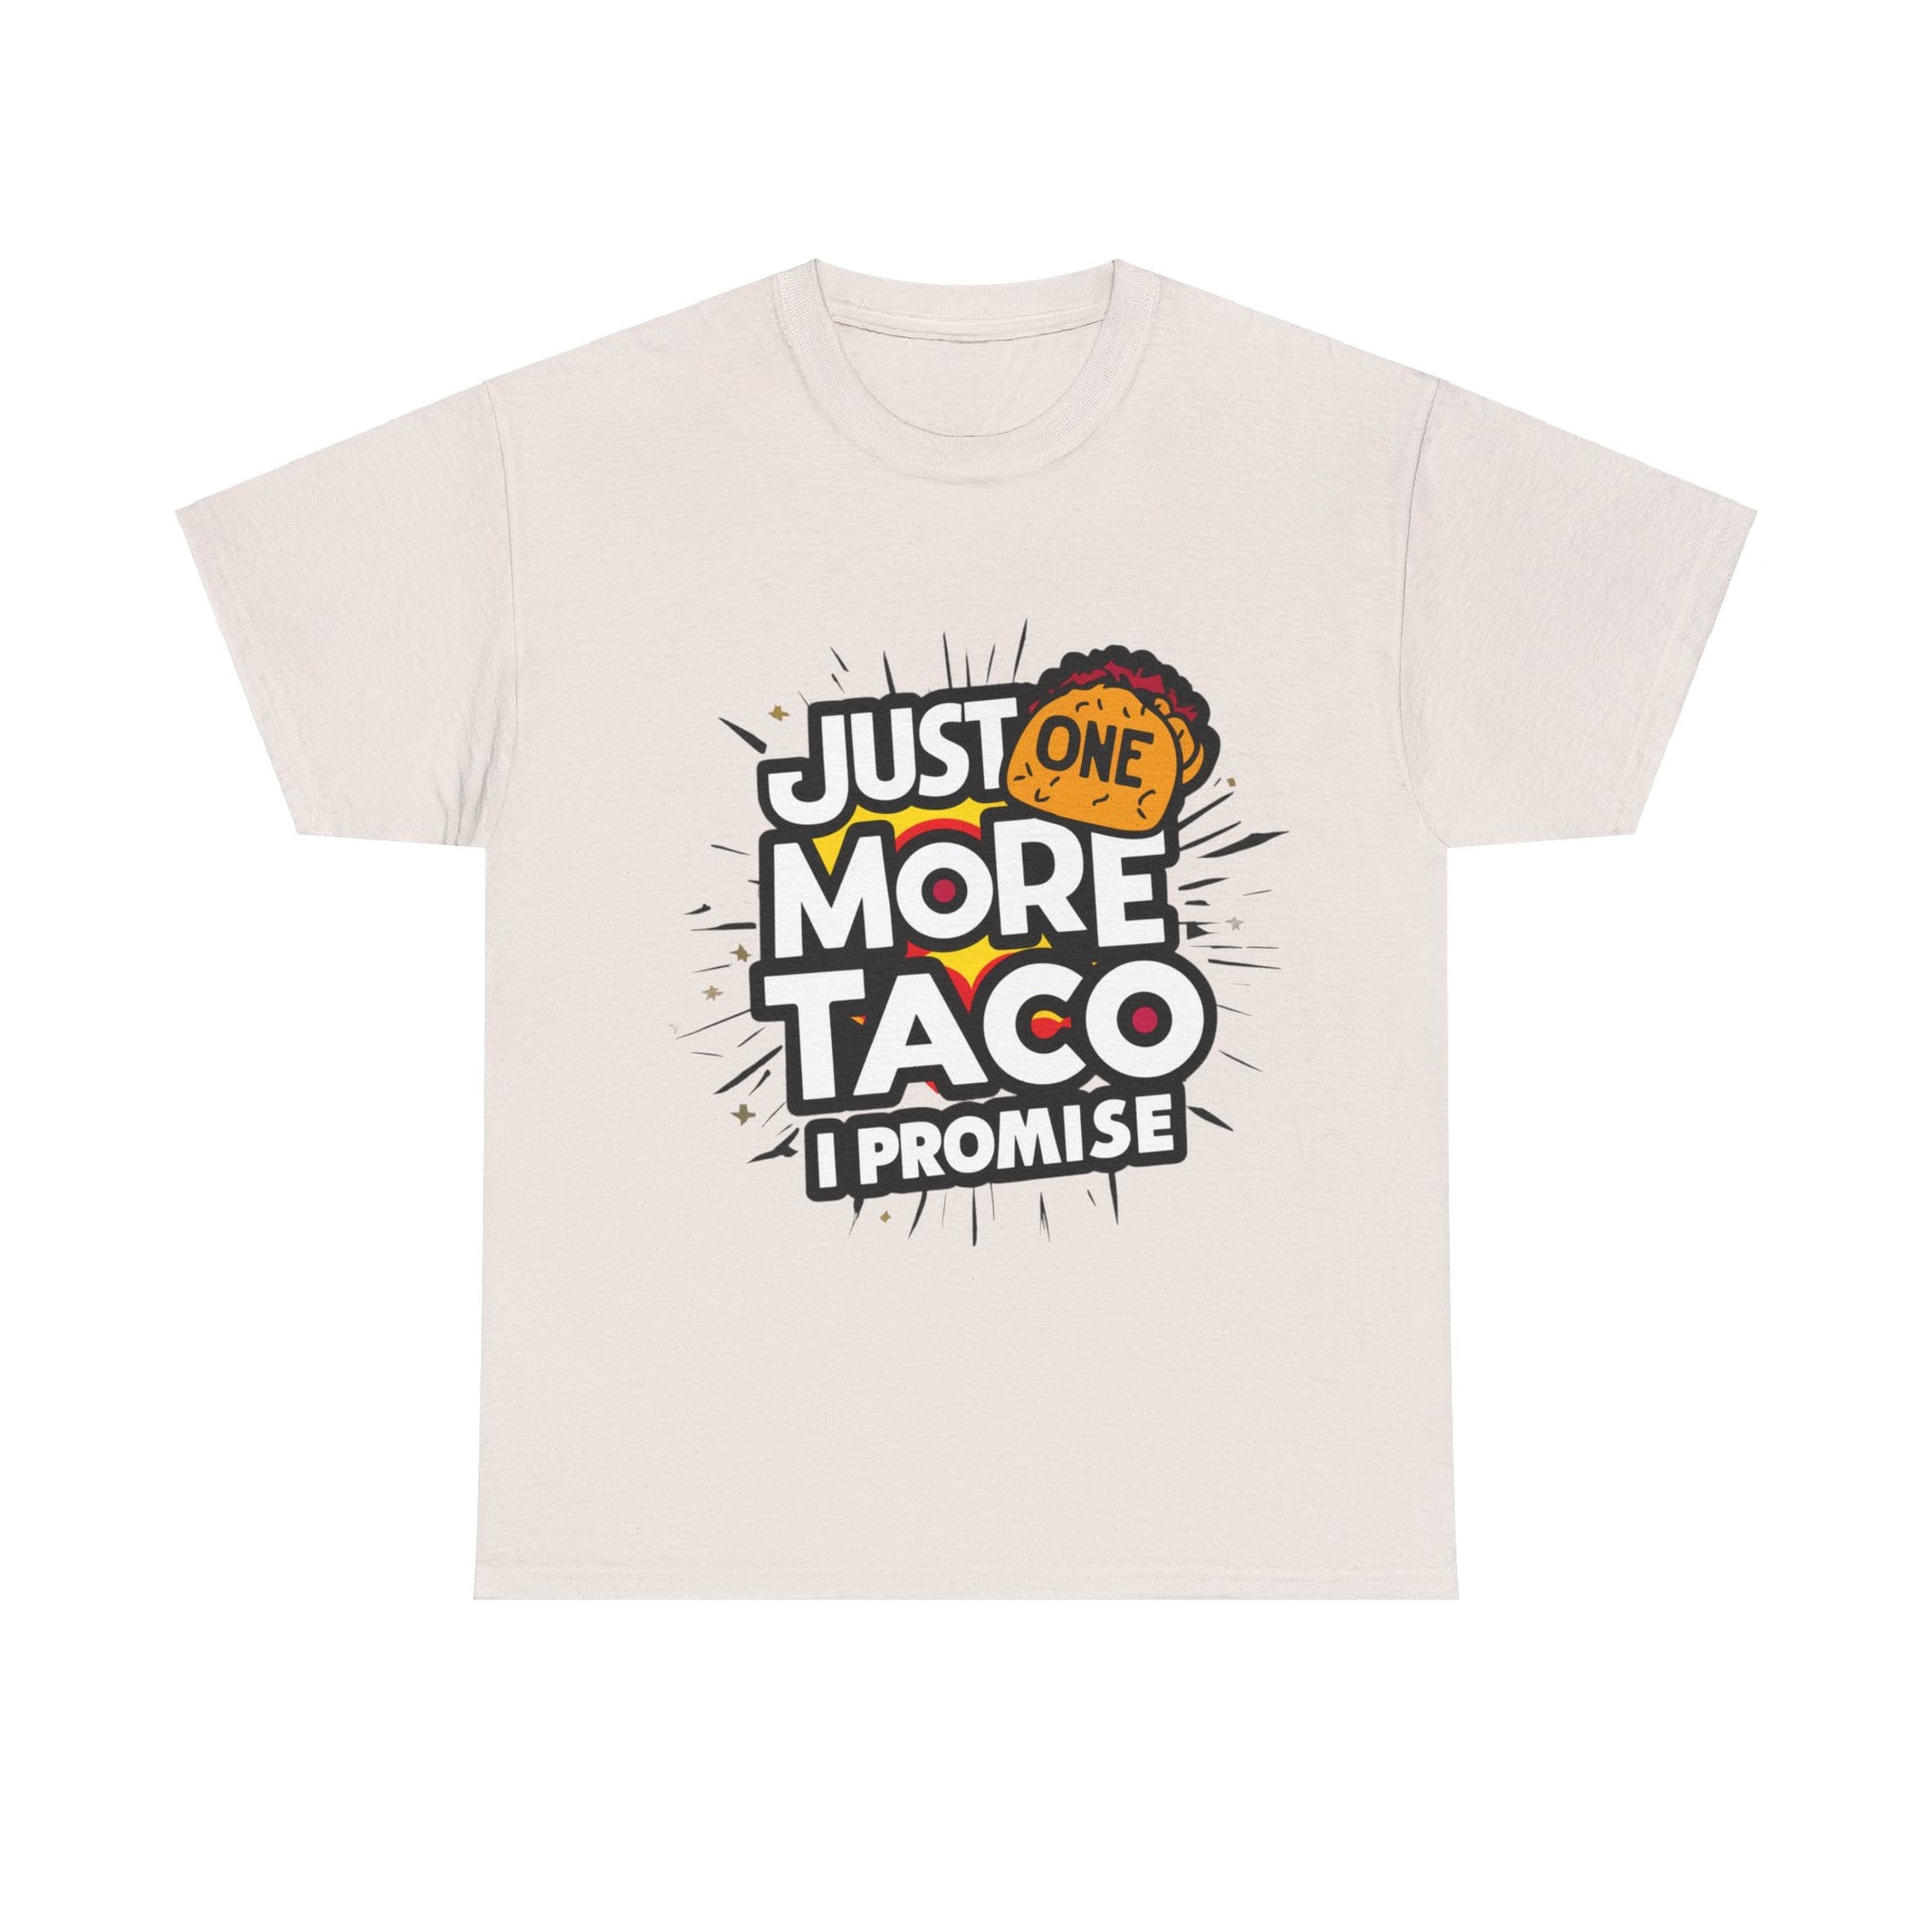 Copy of Just One More Taco I Promise Mexican Food Graphic Unisex Heavy Cotton Tee Cotton Funny Humorous Graphic Soft Premium Unisex Men Women Ice Gray T-shirt Birthday Gift-12